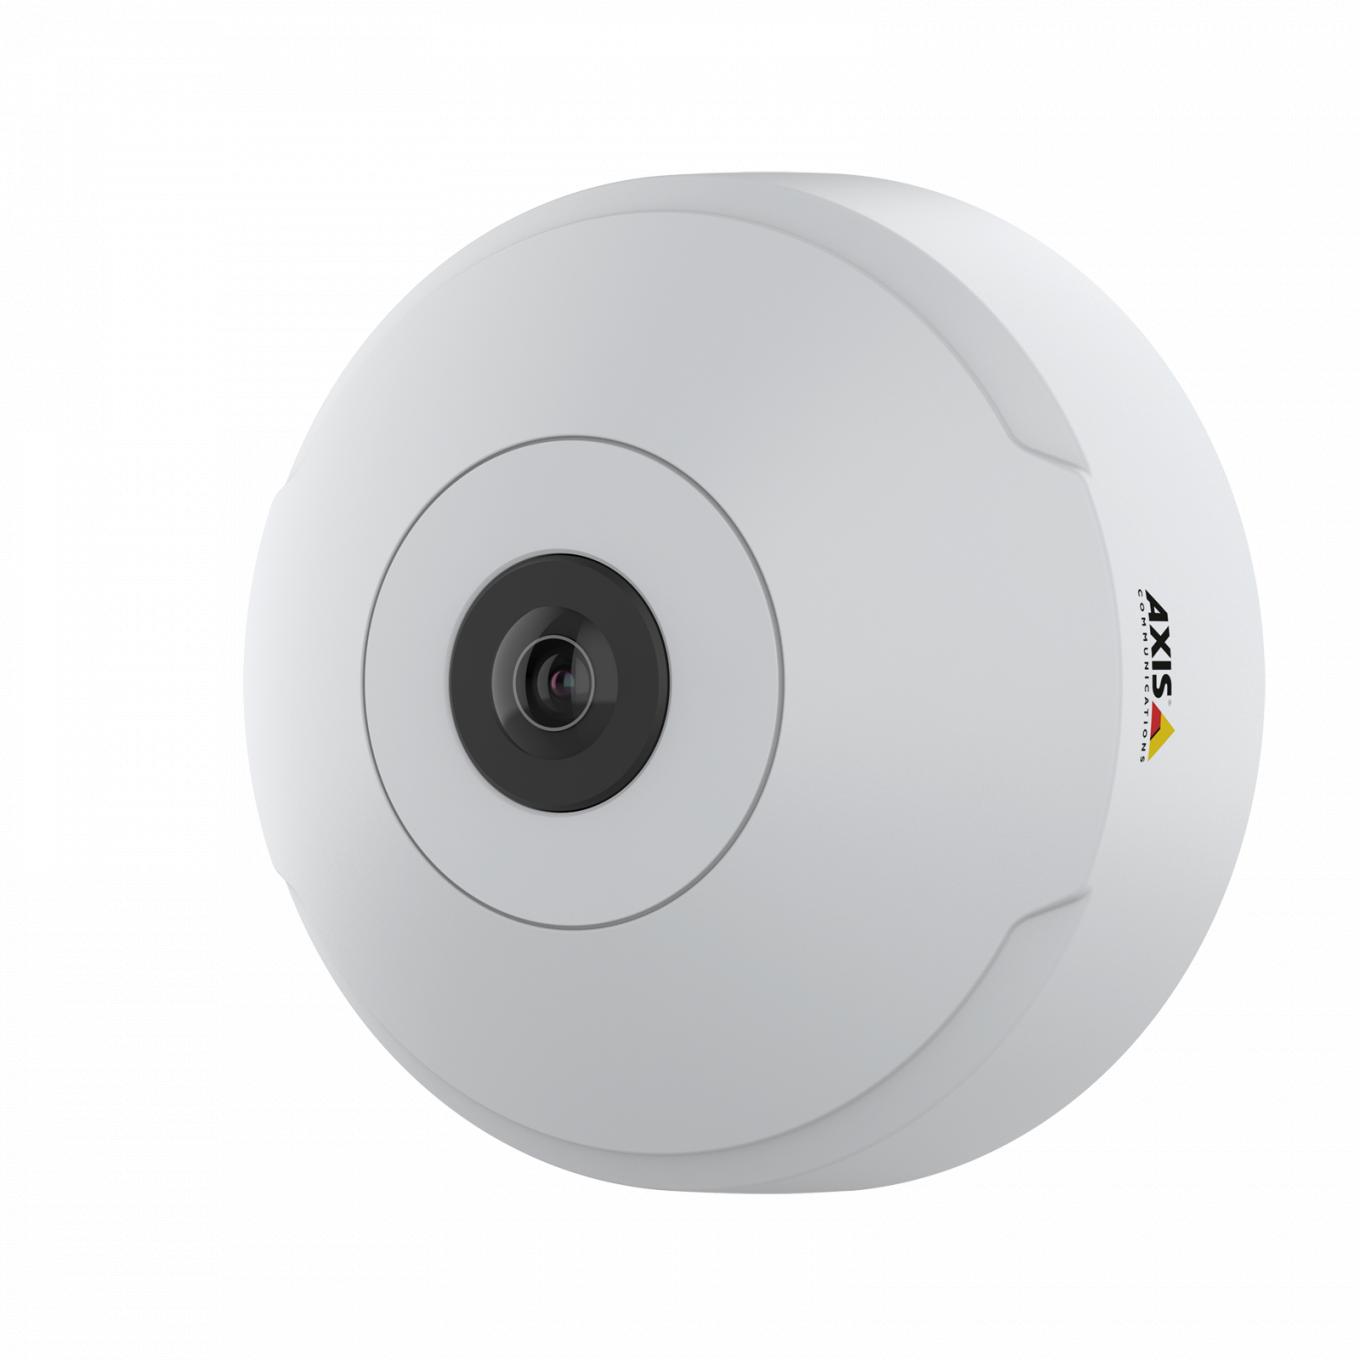 AXIS M3067-P Network Camera | Axis Communications